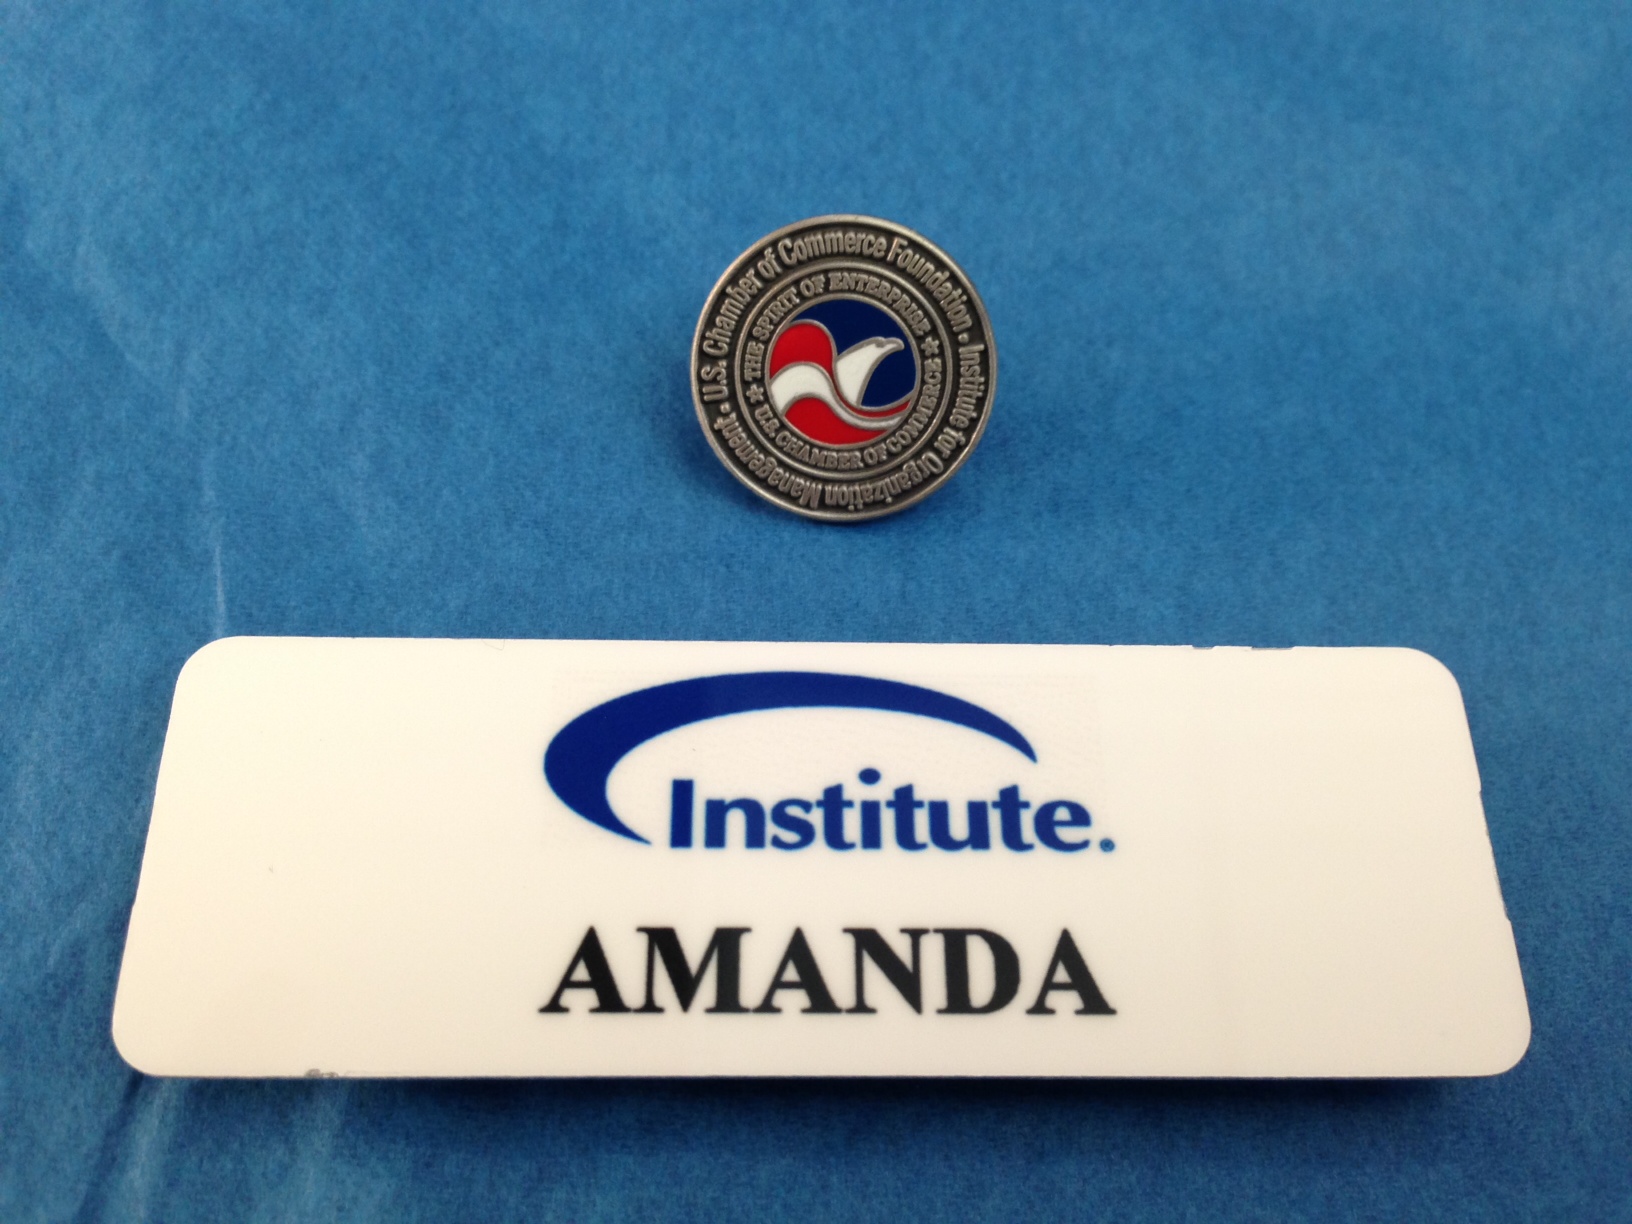 Name Tags and Lapel Pins: Are you wearing them correctly?